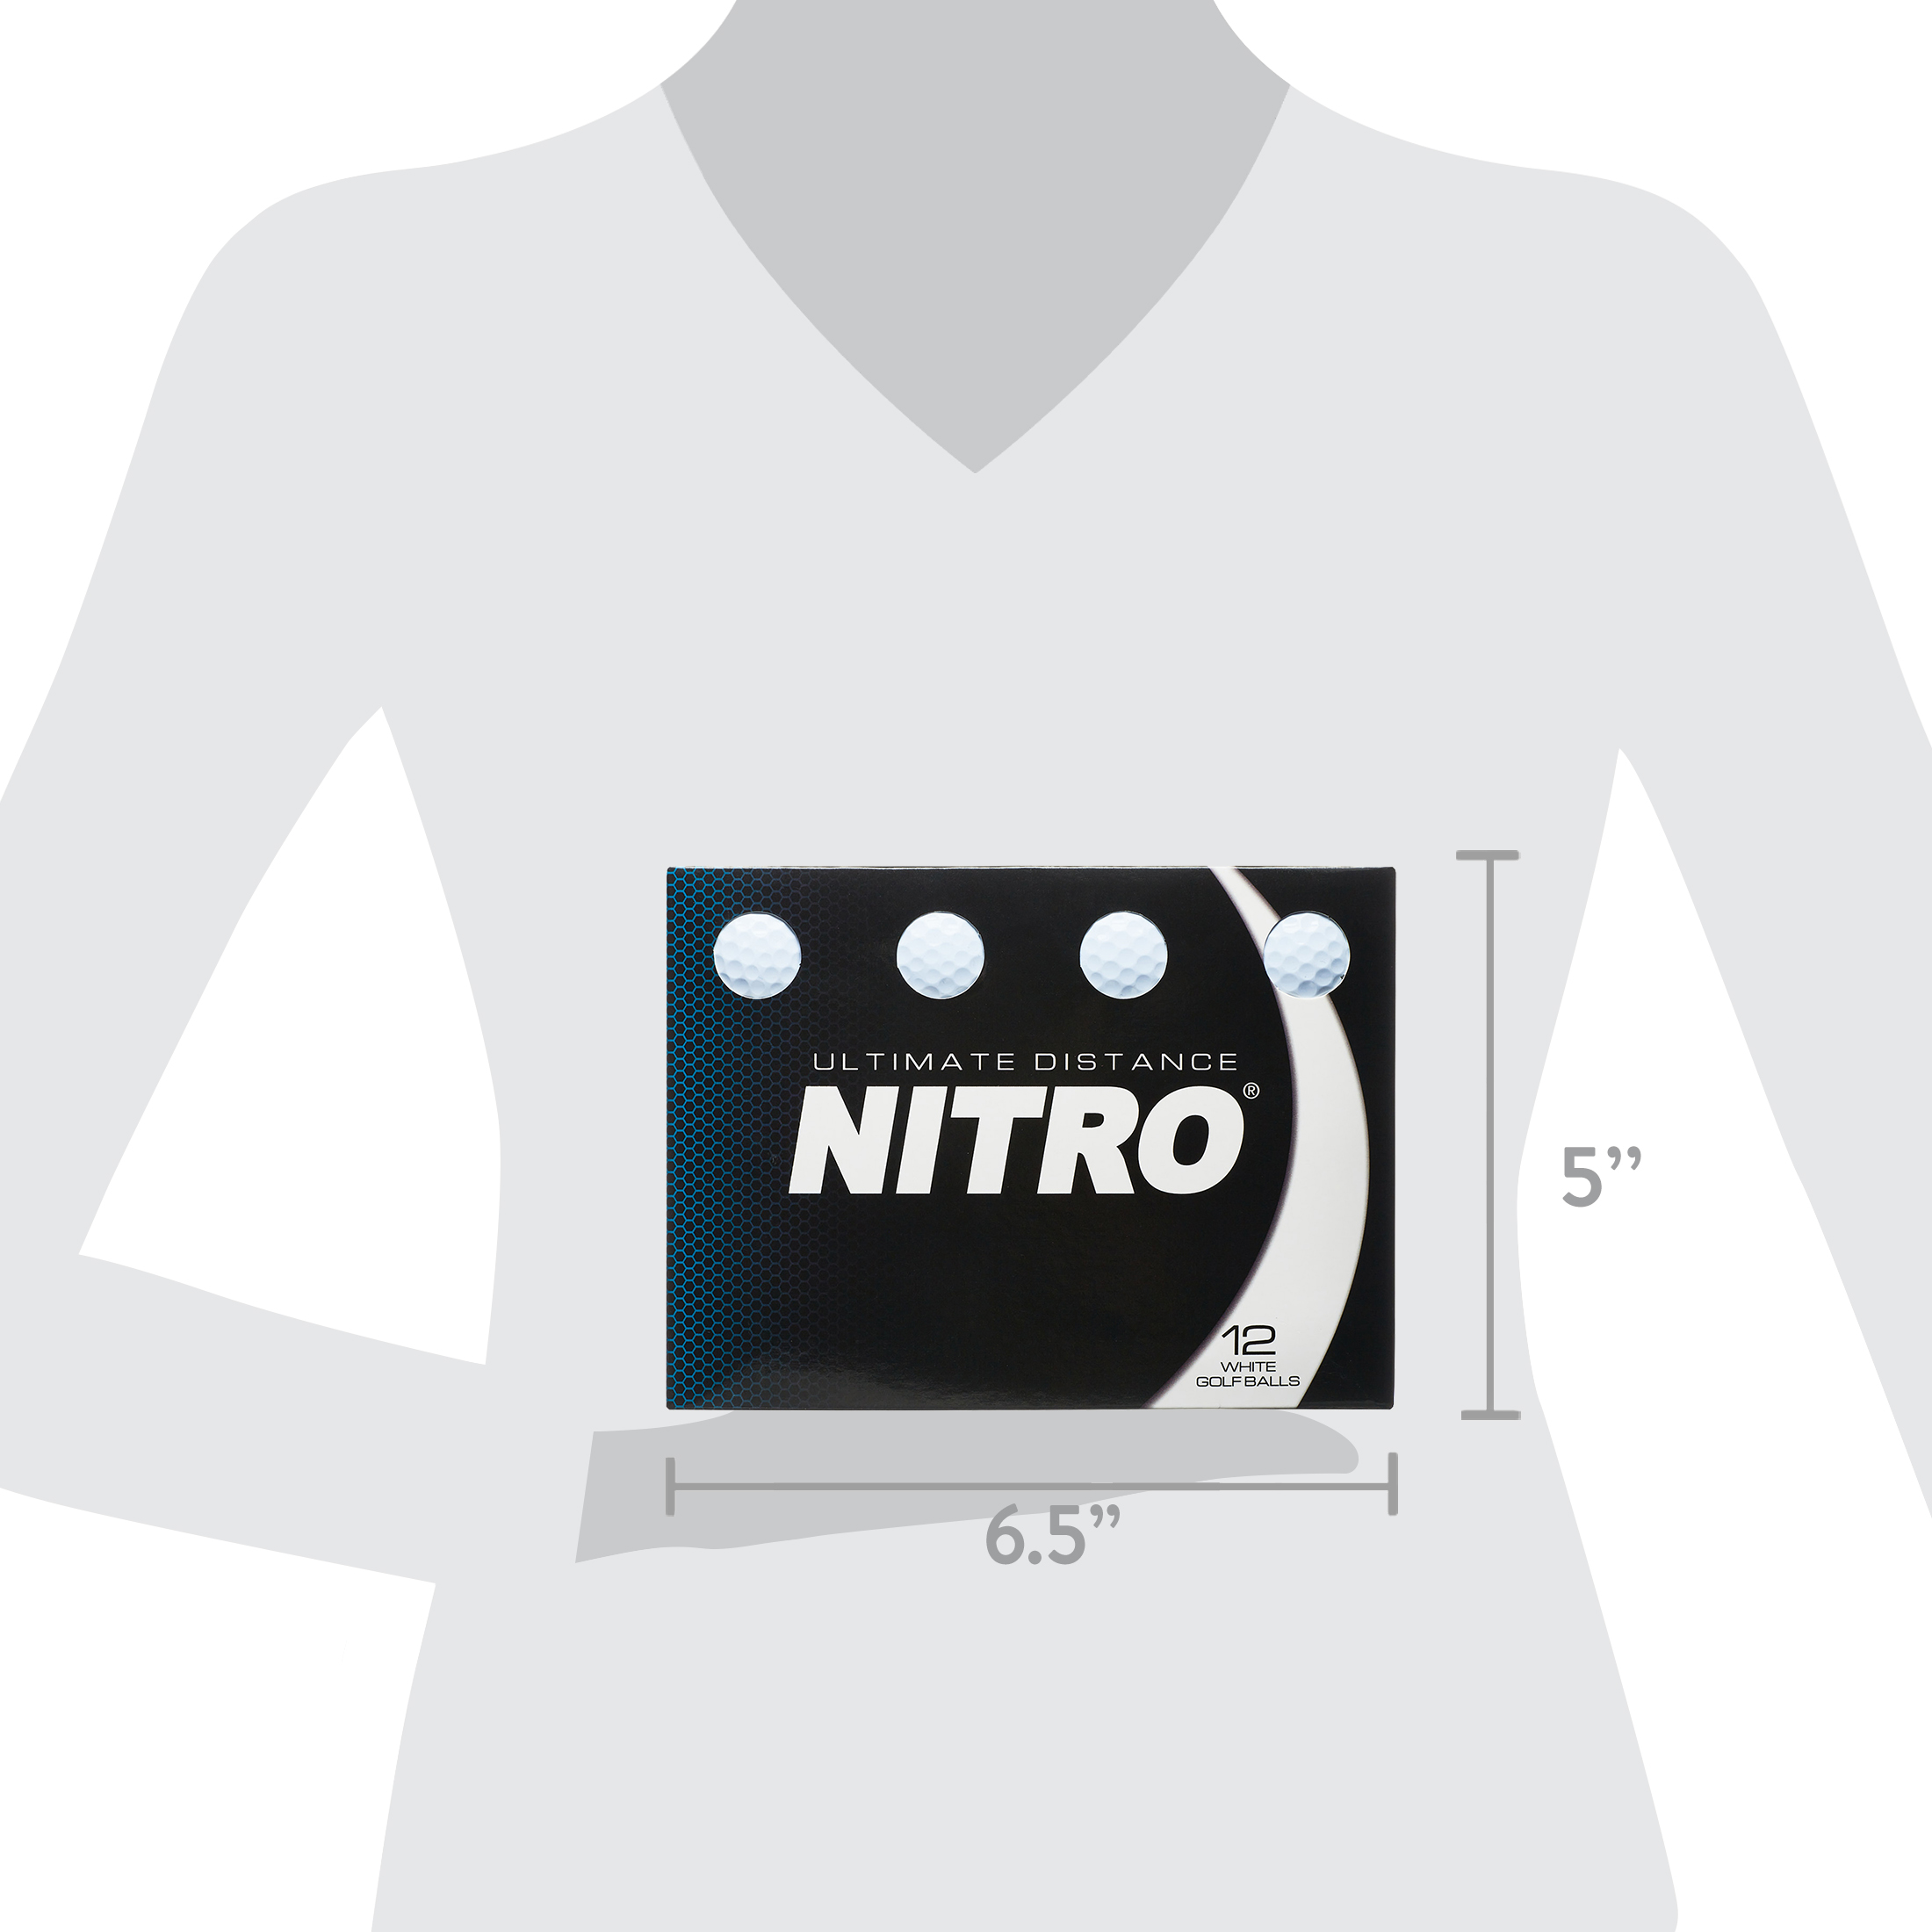 Nitro Golf Ultimate Distance Golf Balls, 12 Pack - image 4 of 4